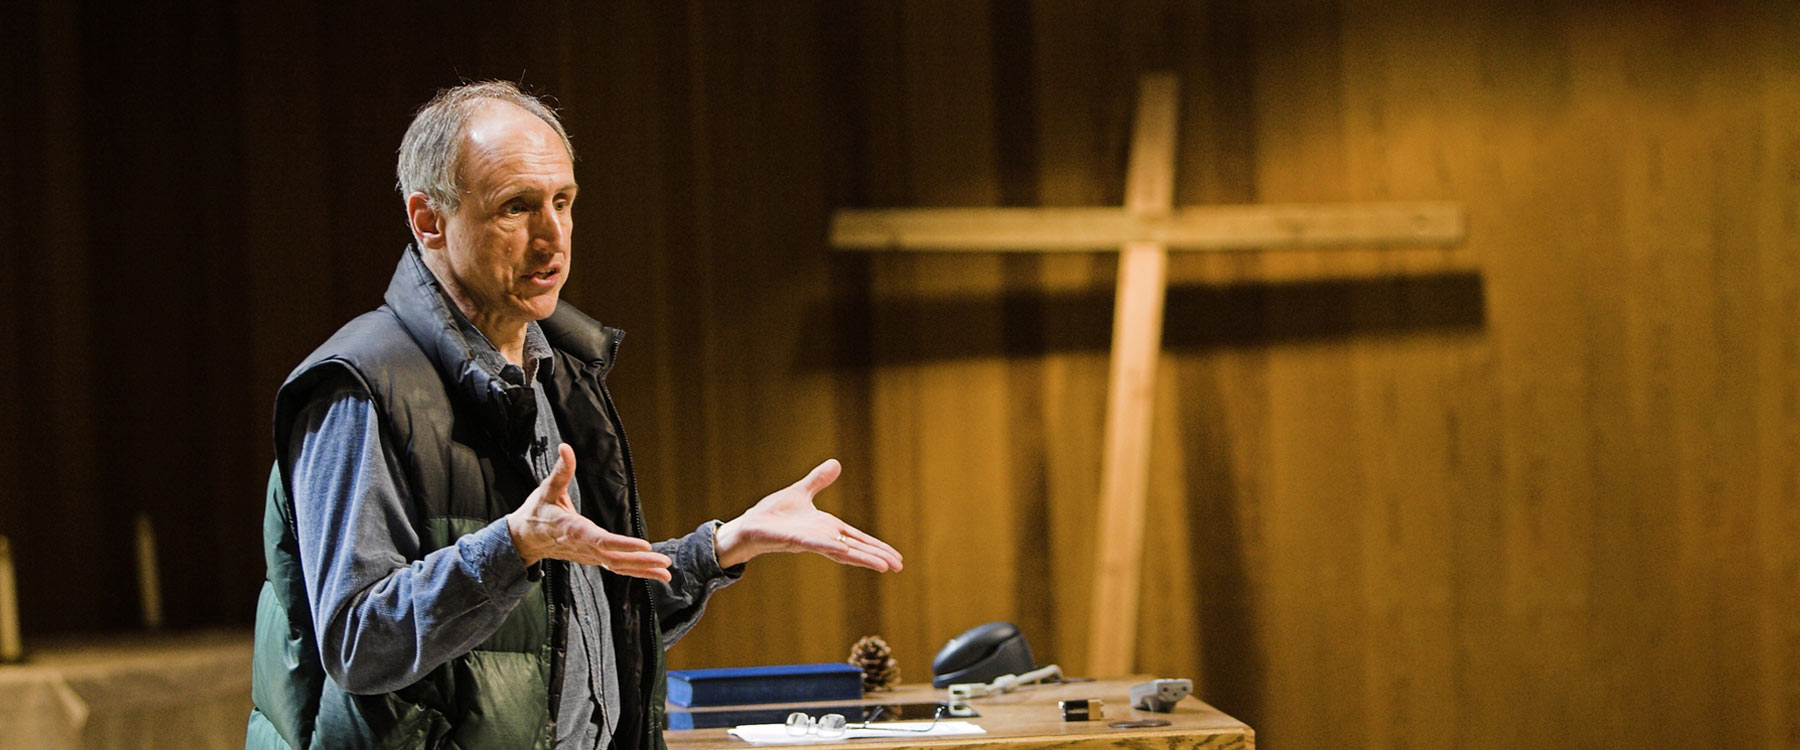 Professor Jerry Sittser gestures with outstretched hands during a theology lecture in the chapel.